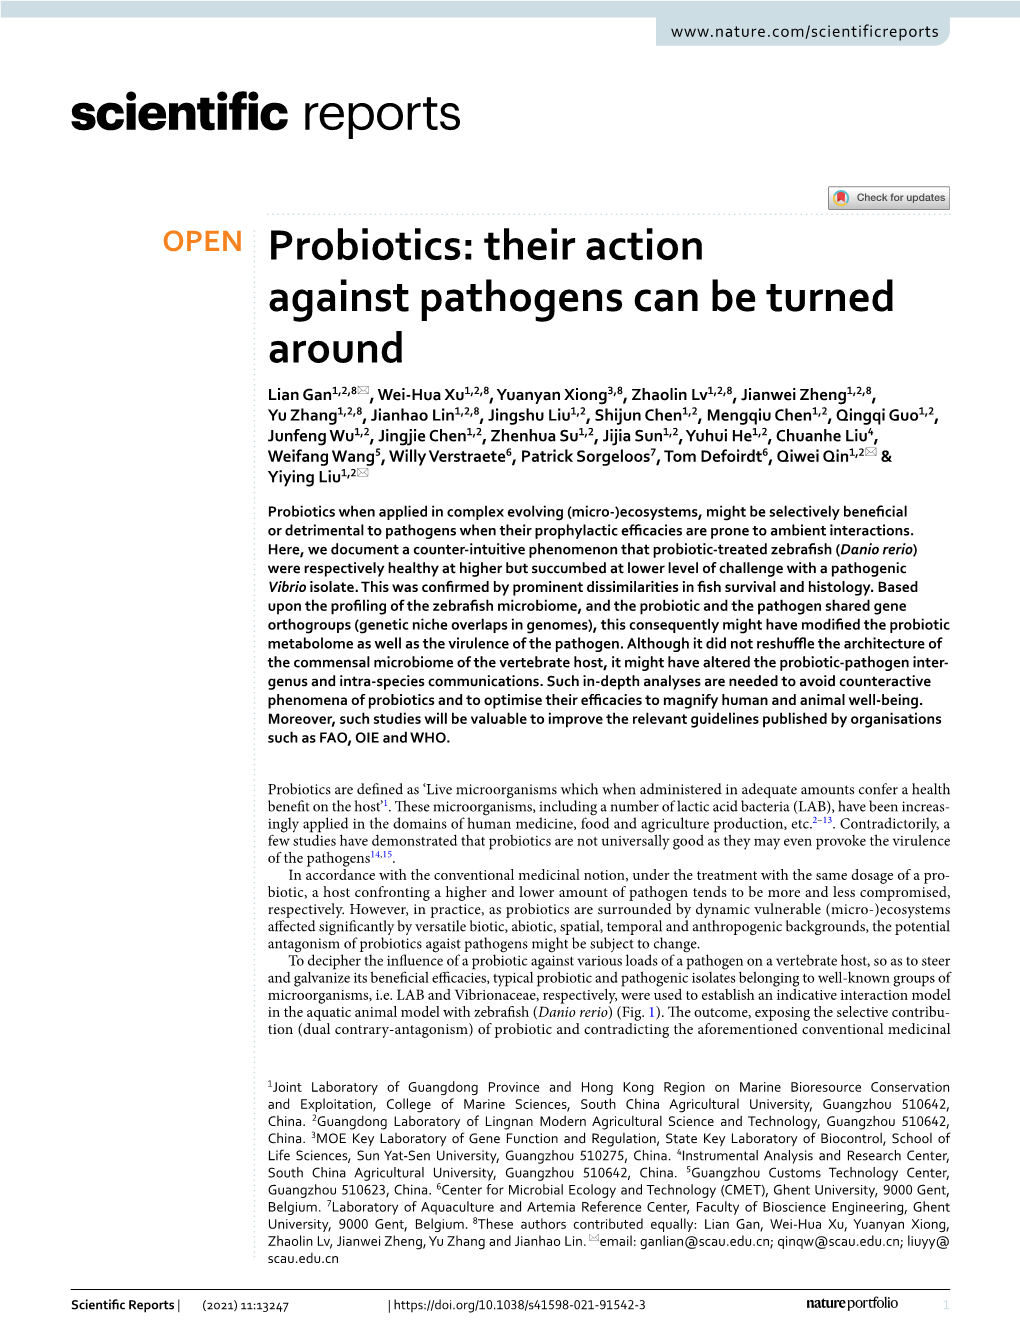 Probiotics: Their Action Against Pathogens Can Be Turned Around